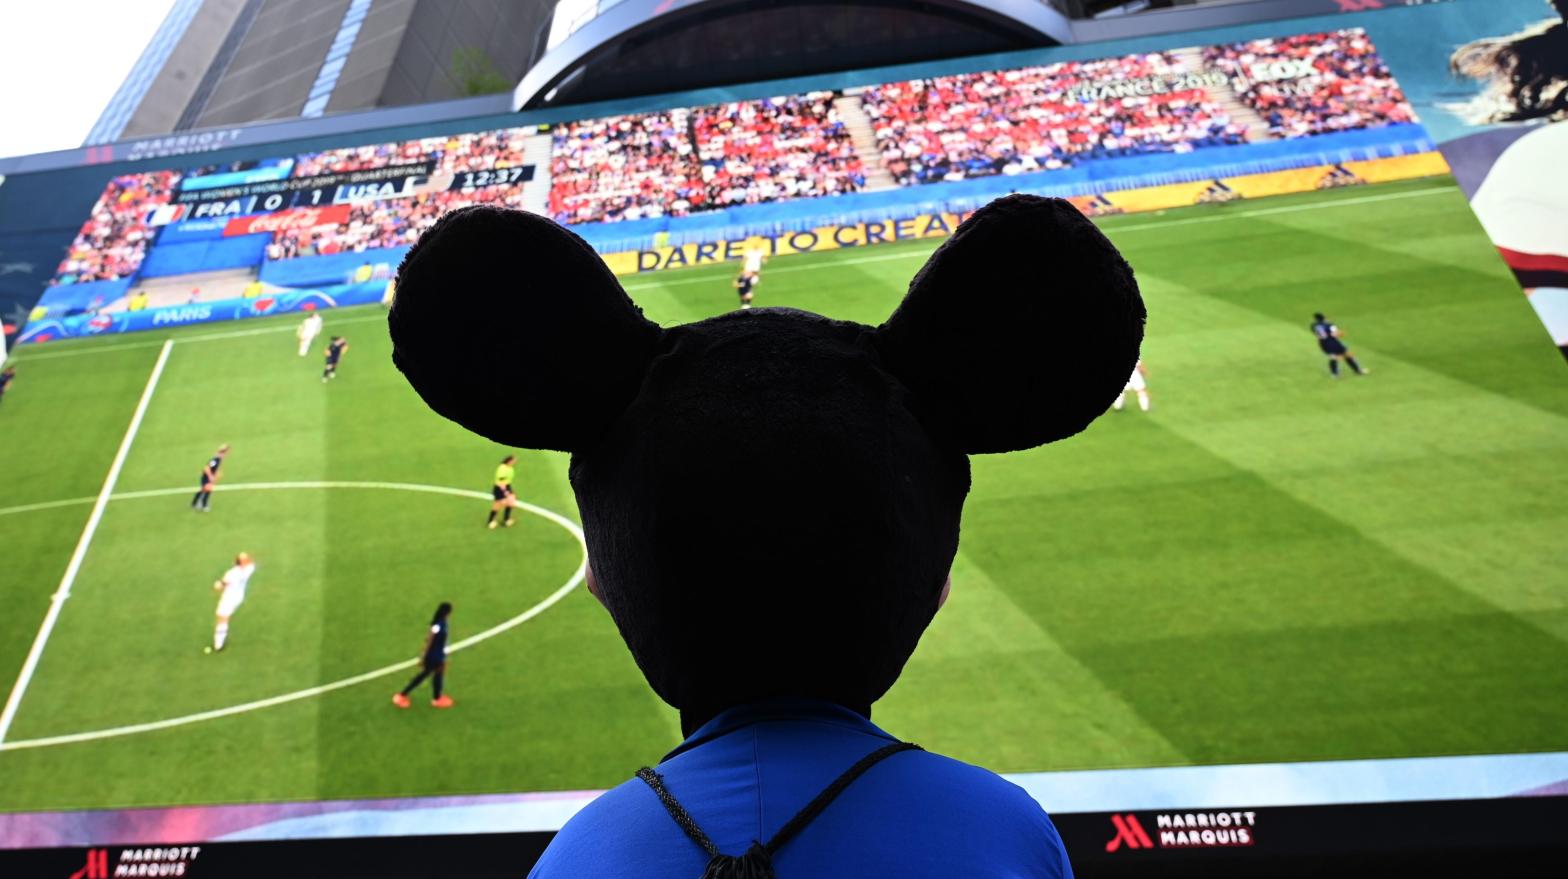 Disney has had to justify its ownership of ESPN to some investors, but apparently the massive media corporation is planning to use the brand as a vehicle for a sports betting app. (Photo: TIMOTHY A. CLARY/AFP, Getty Images)